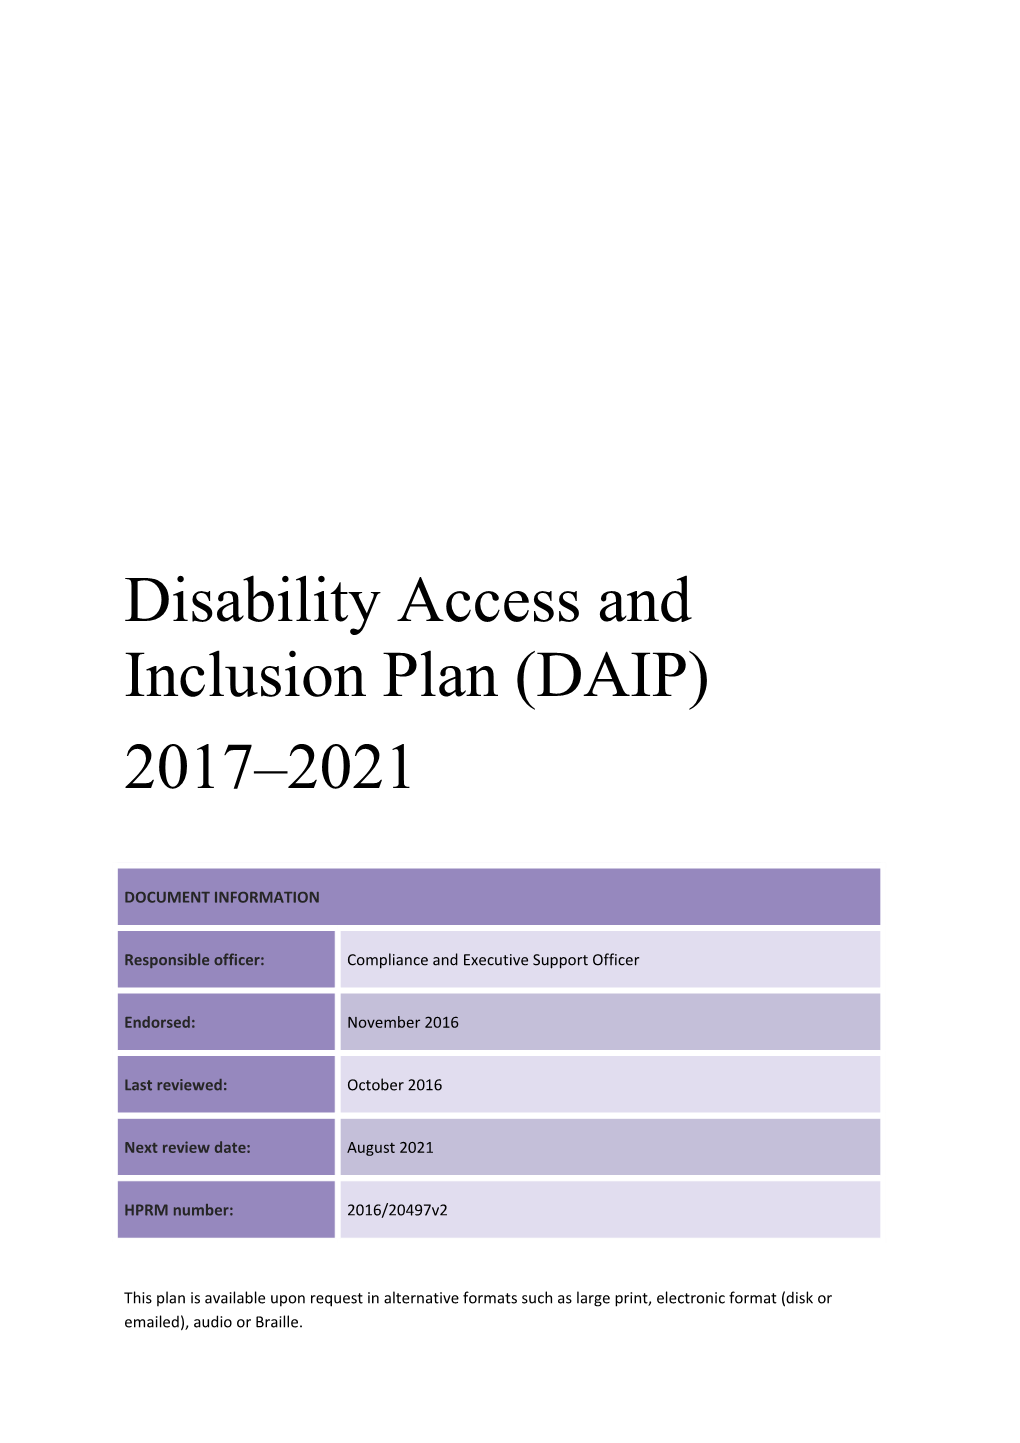 Disability Access and Inclusion Plan (DAIP)